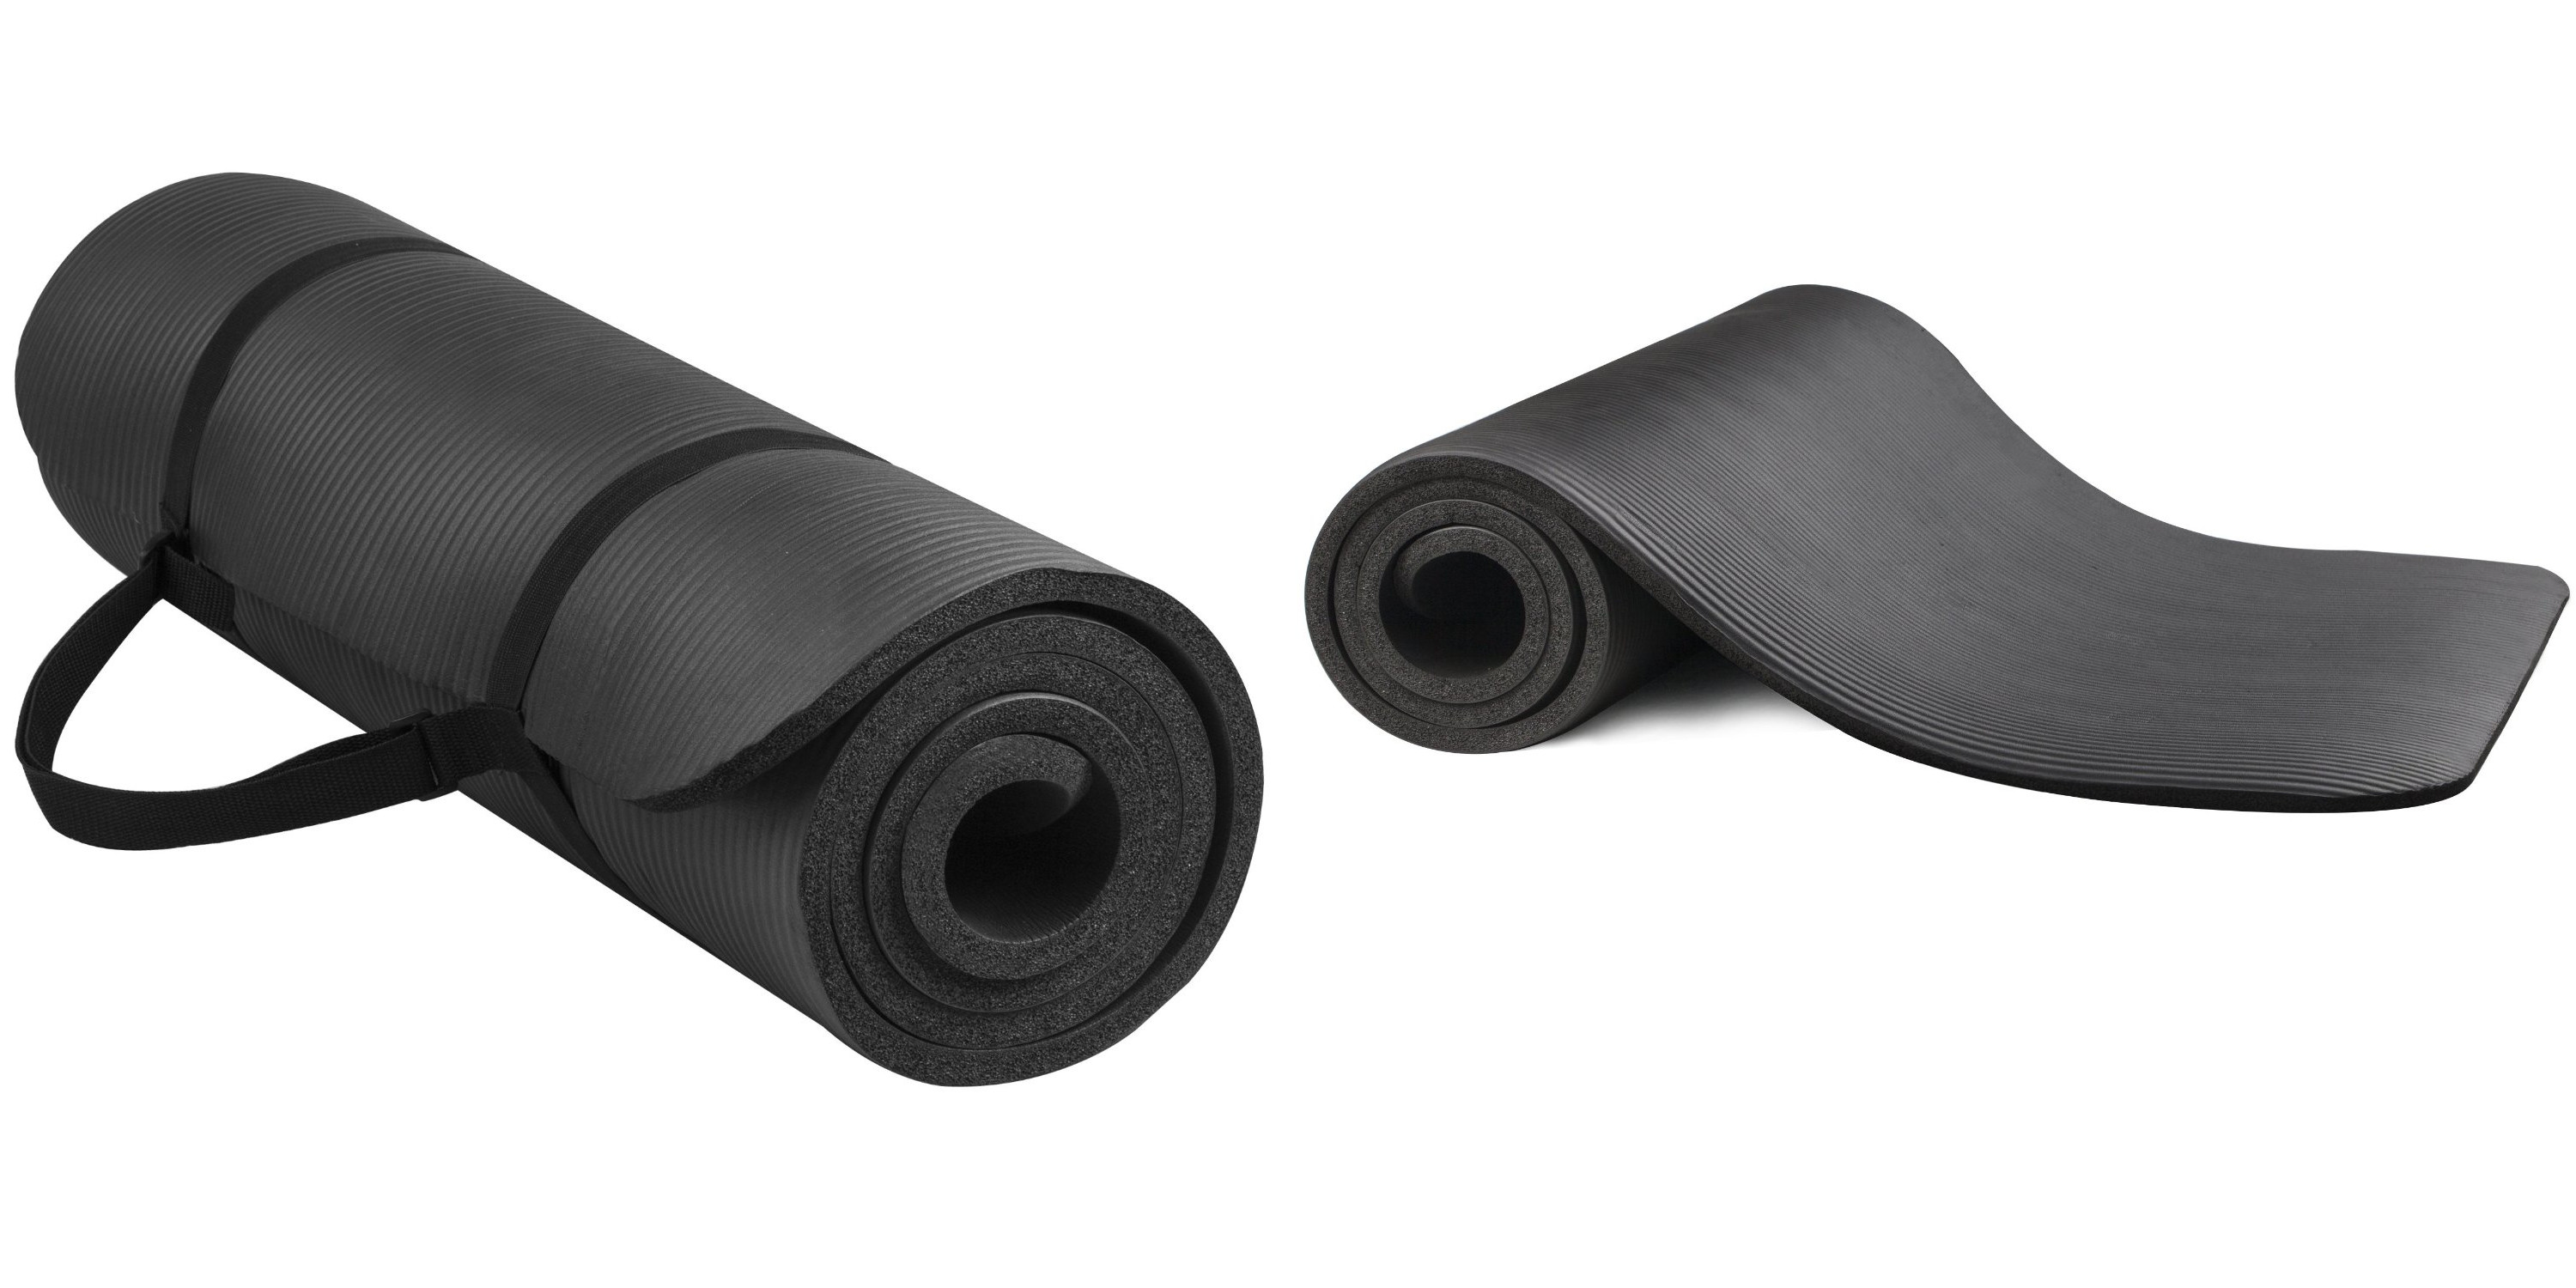 Refresh your old workout mat w/ BalanceFrom's highly-rated GoYoga (Prime  only): $16 shipped (Reg. $20+)